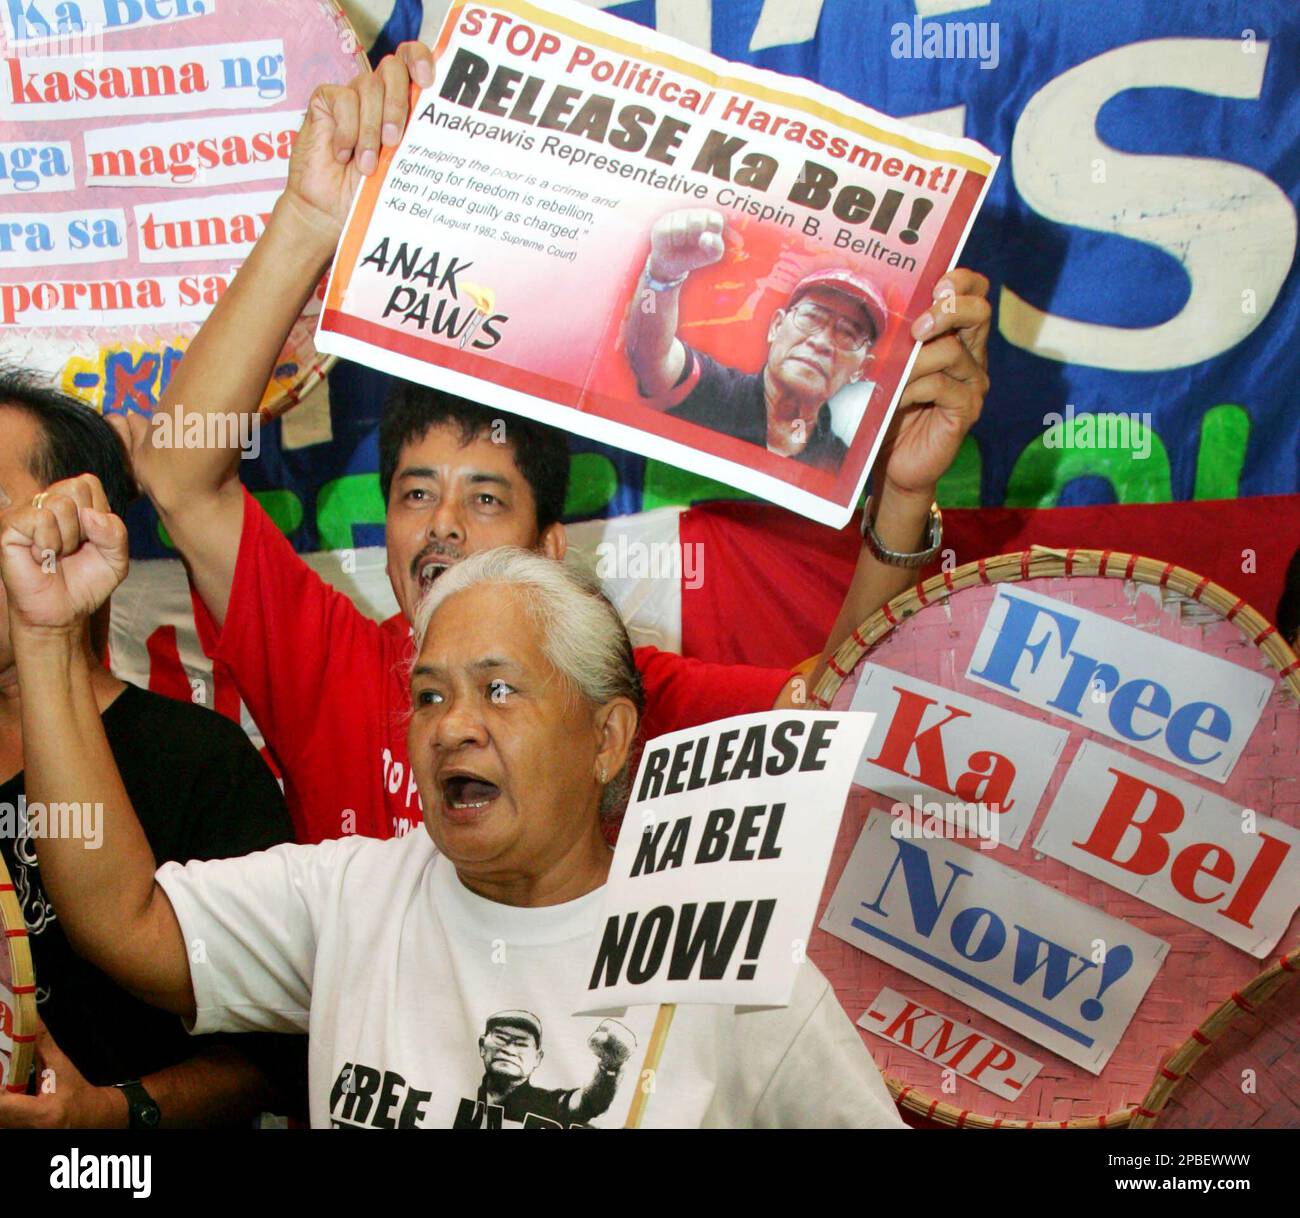 Rosario Beltran wife of detained leftist lawmaker Crispin Beltran, leads her supporters as they demand his immediate release during a press conference Saturday, June 2, 2007 in suburban Quezon City, north of Manila, Philippines. The Philippine Supreme Court threw out rebellion charges against six left-wing opposition lawmakers and four activists, warning the justice secretary and government prosecutors against using their powers for political ends. (AP Photo/Pat Roque) Stock Photo